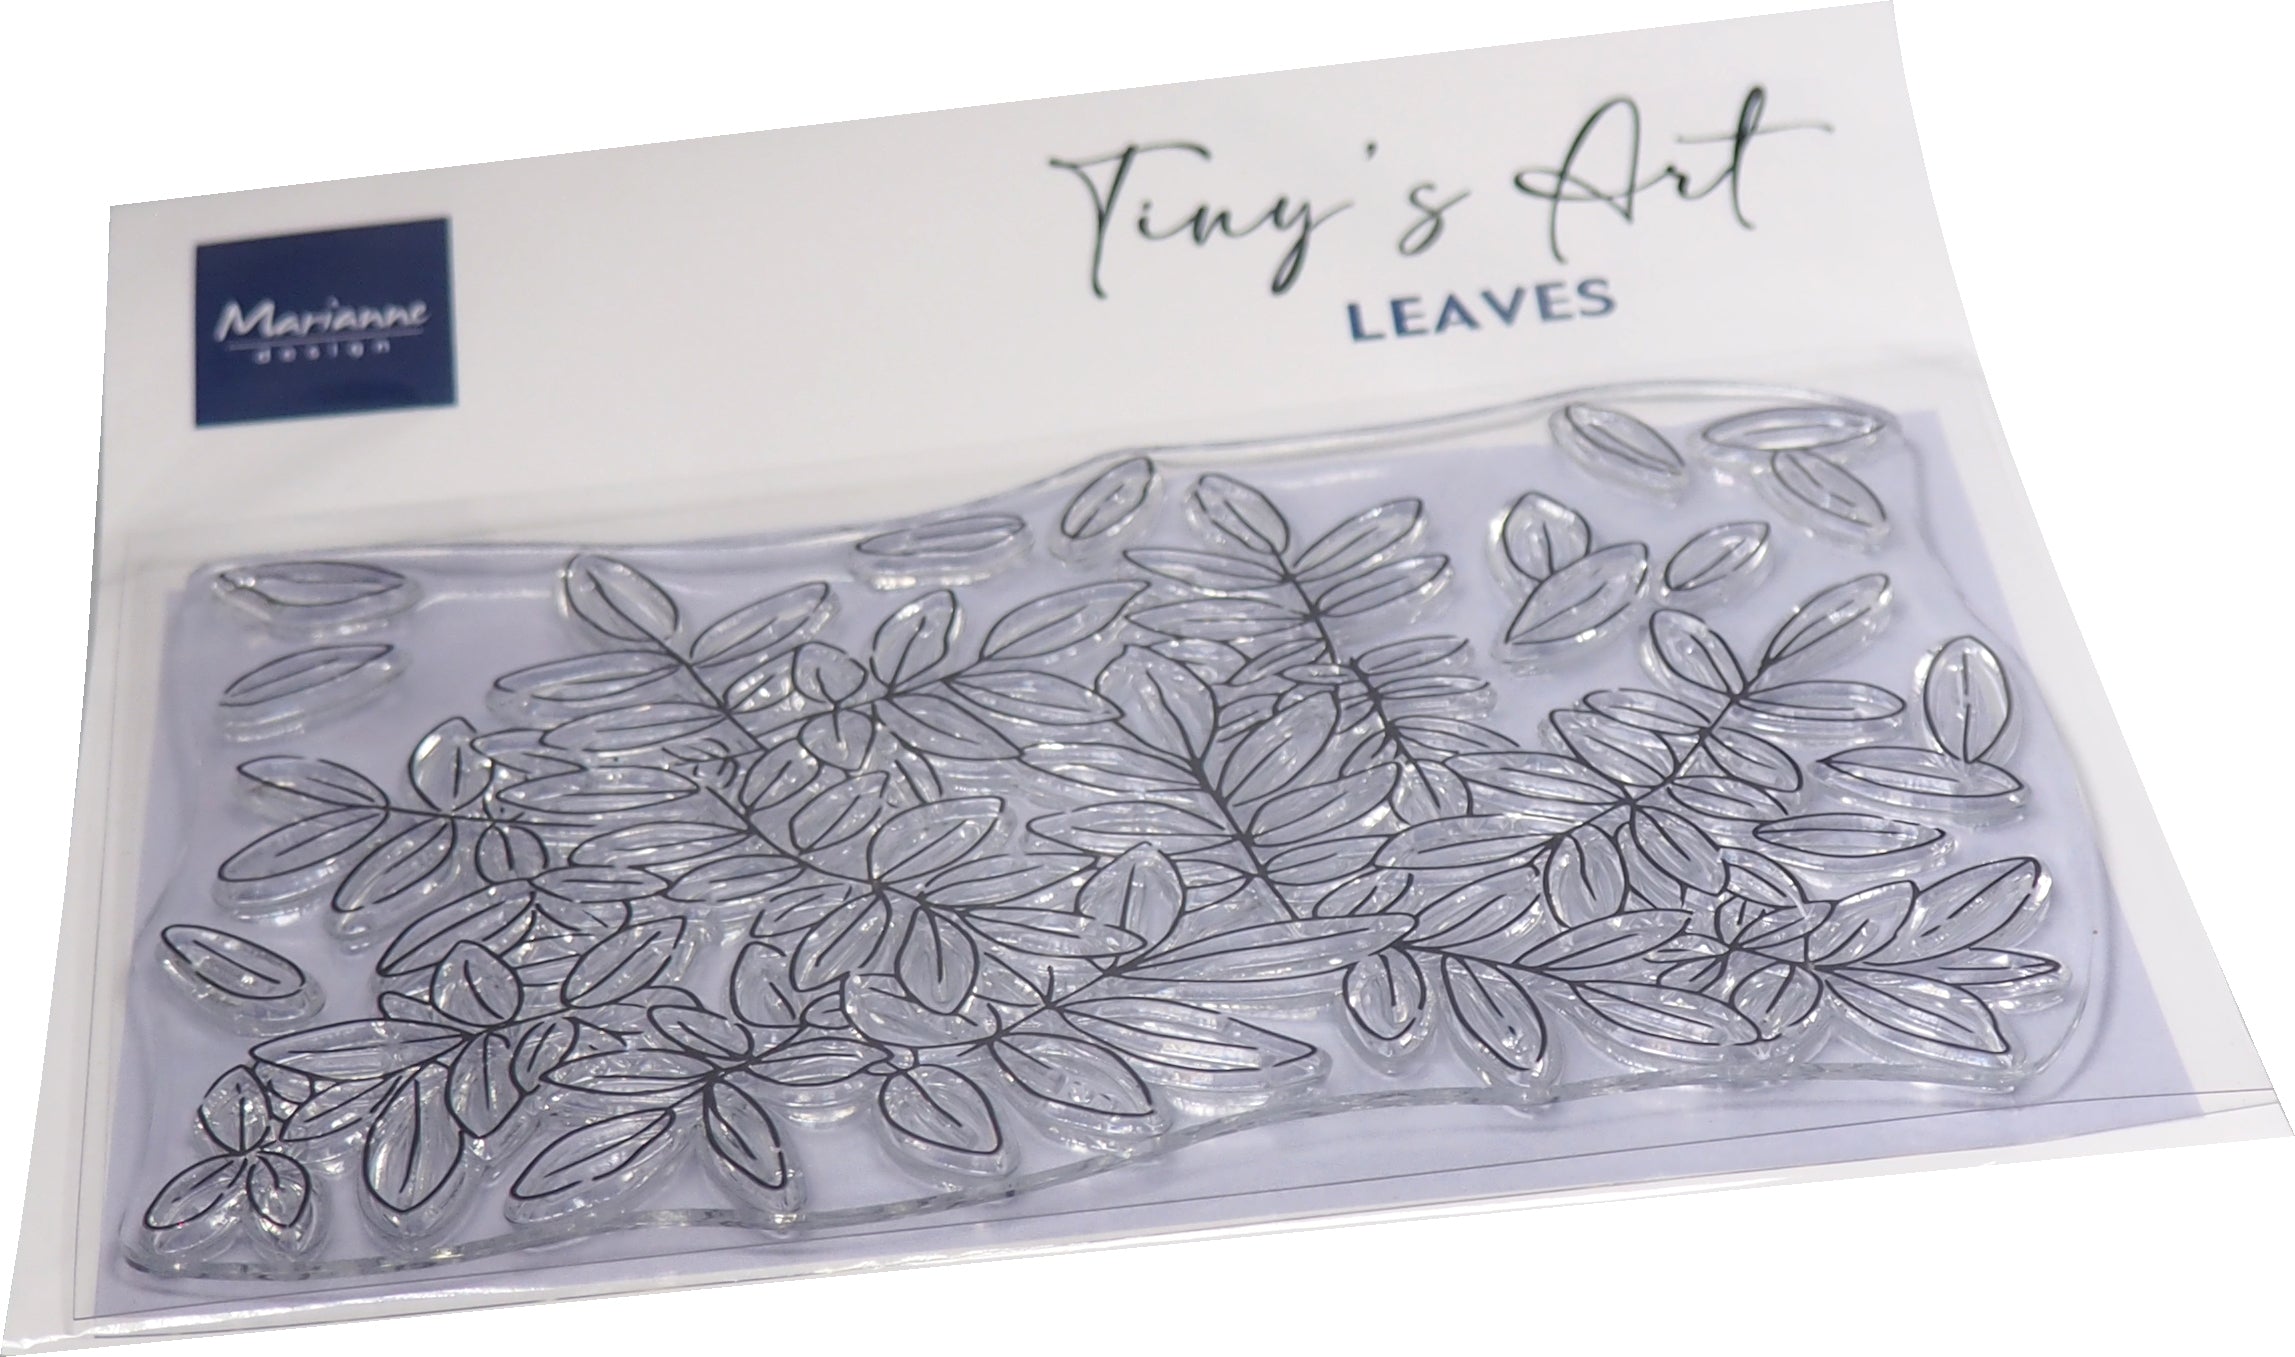 Marianne Design Clear Stamp - Tiny's Art - Leaves